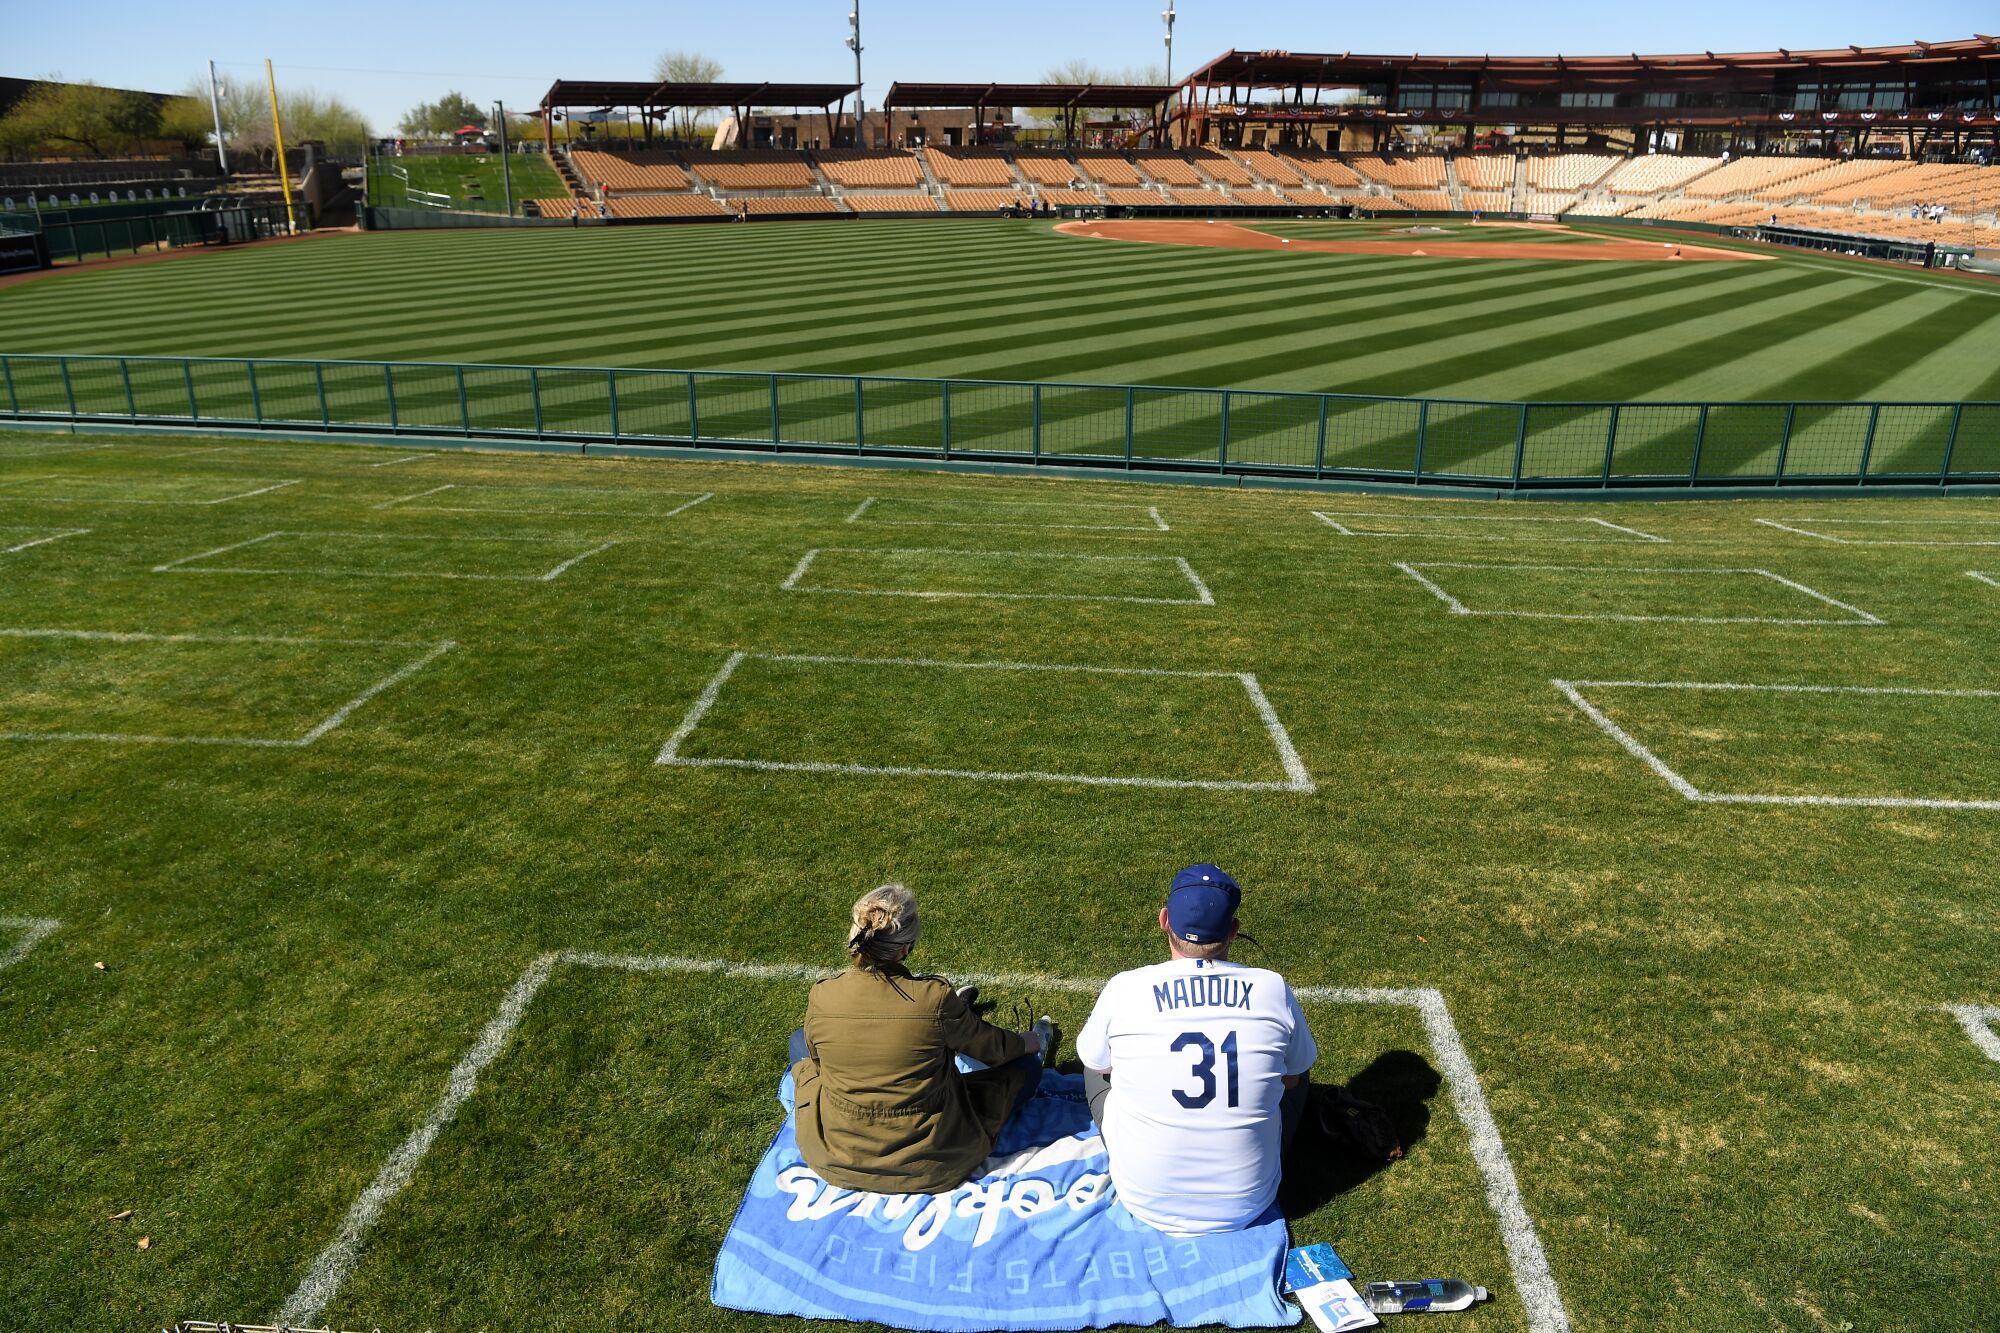 Dodgers fans Lesley Grant and her husband Todd Munson arrive early 